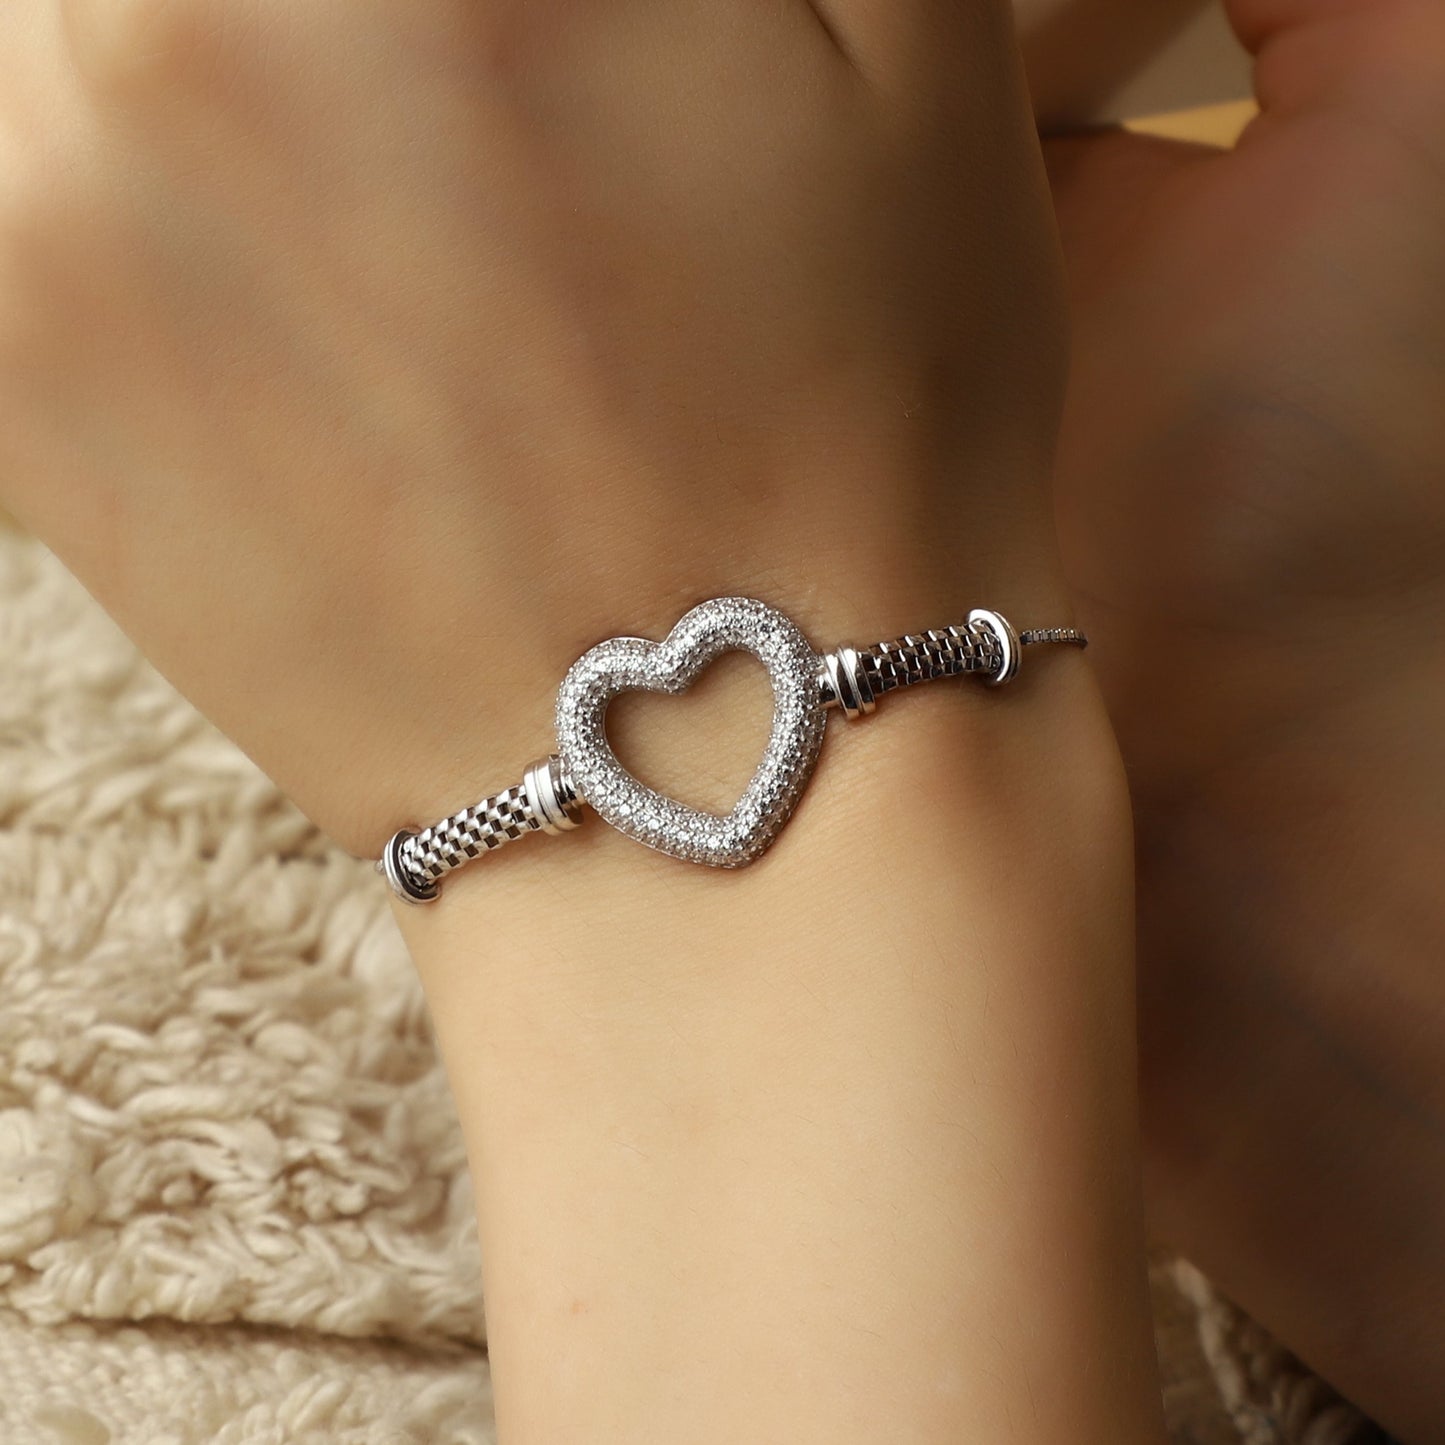 Studded Heart Bracelet with Adjustable Chain